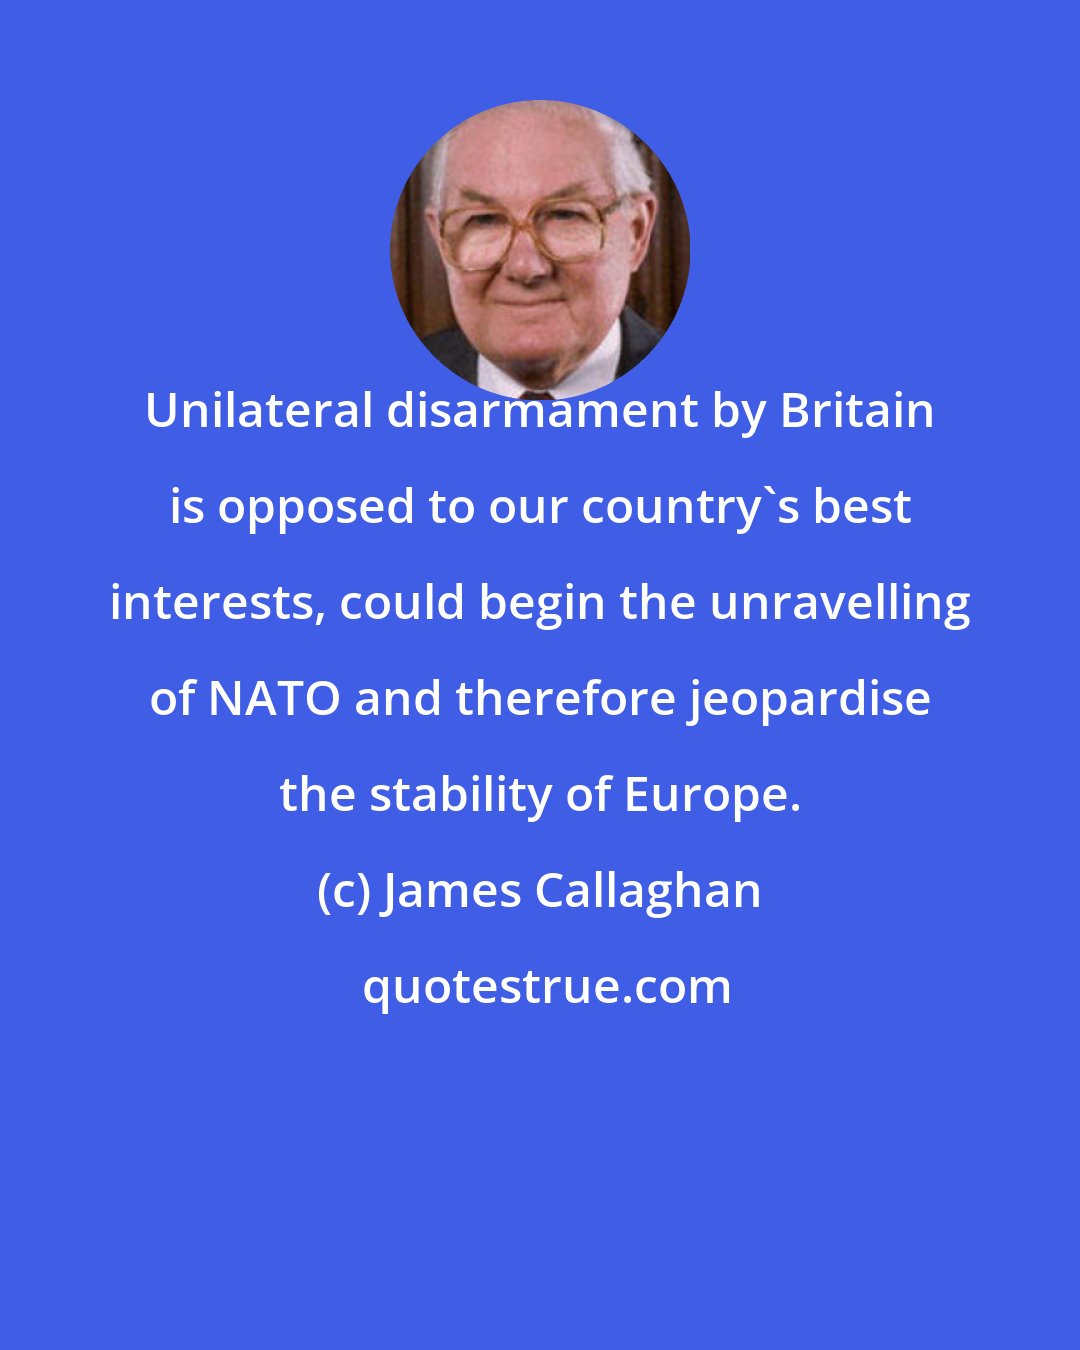 James Callaghan: Unilateral disarmament by Britain is opposed to our country's best interests, could begin the unravelling of NATO and therefore jeopardise the stability of Europe.